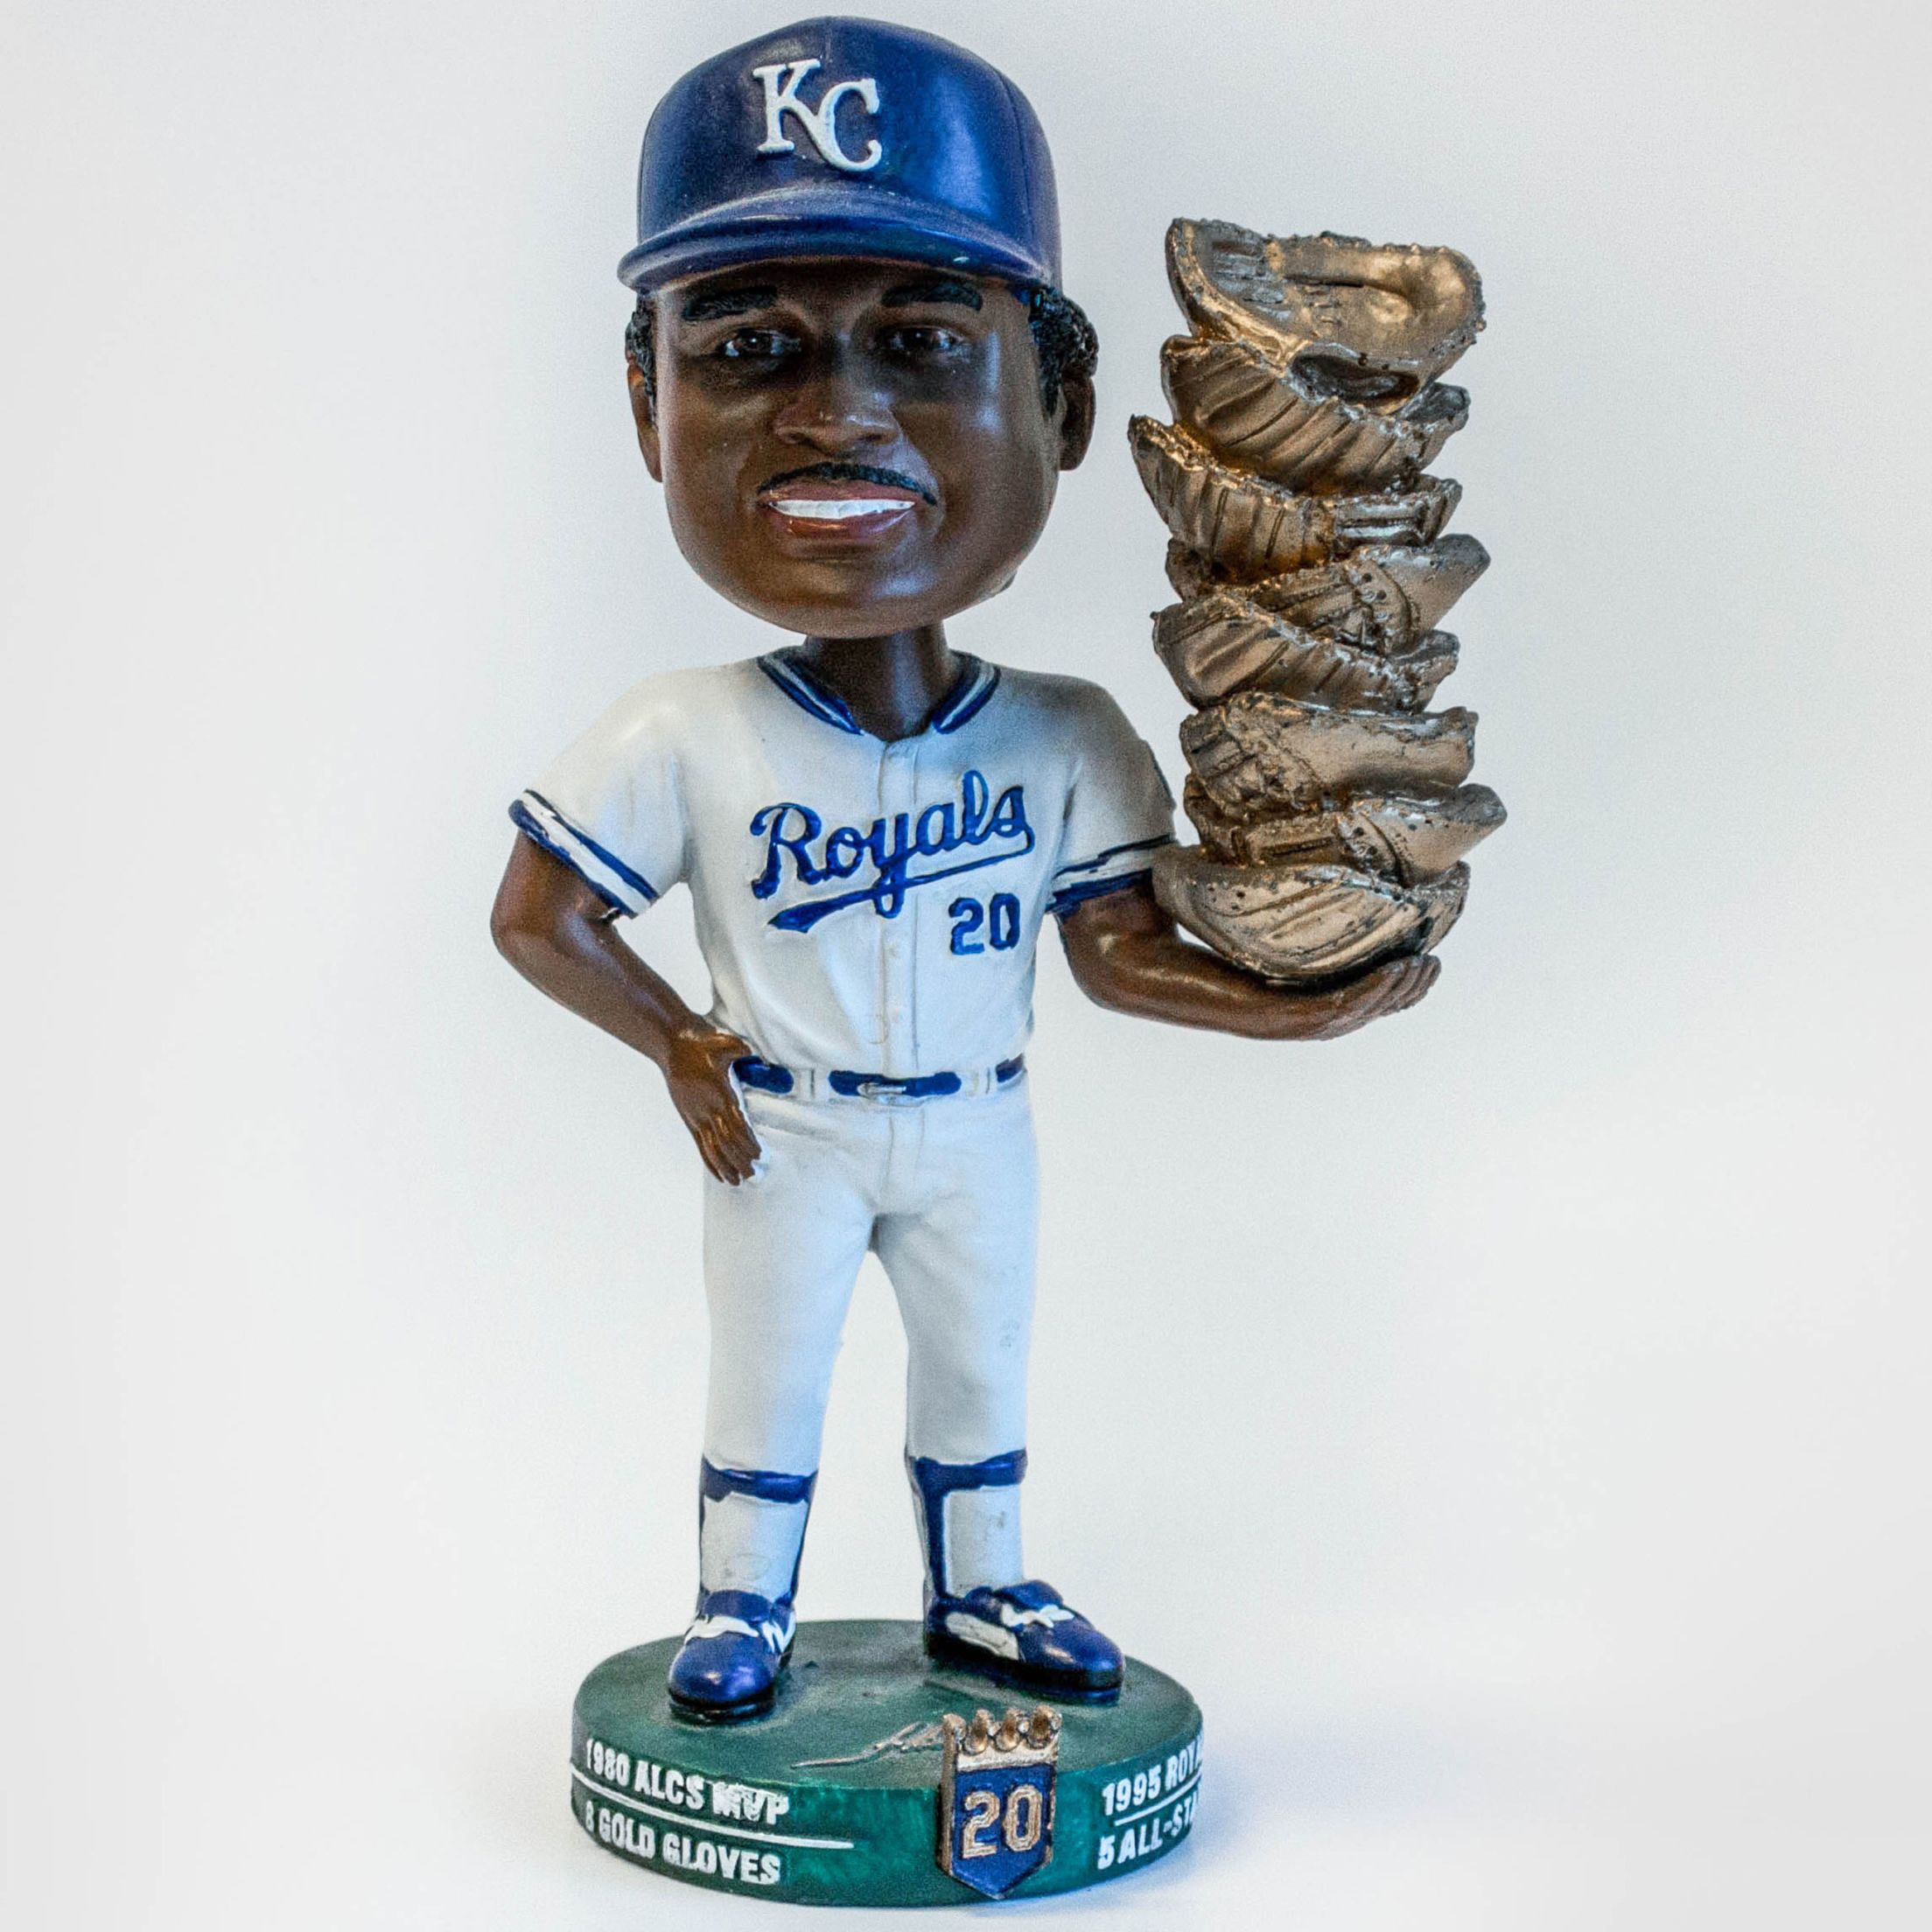 Kansas City Royals will honor their veteran groundskeeper with his very own  bobblehead